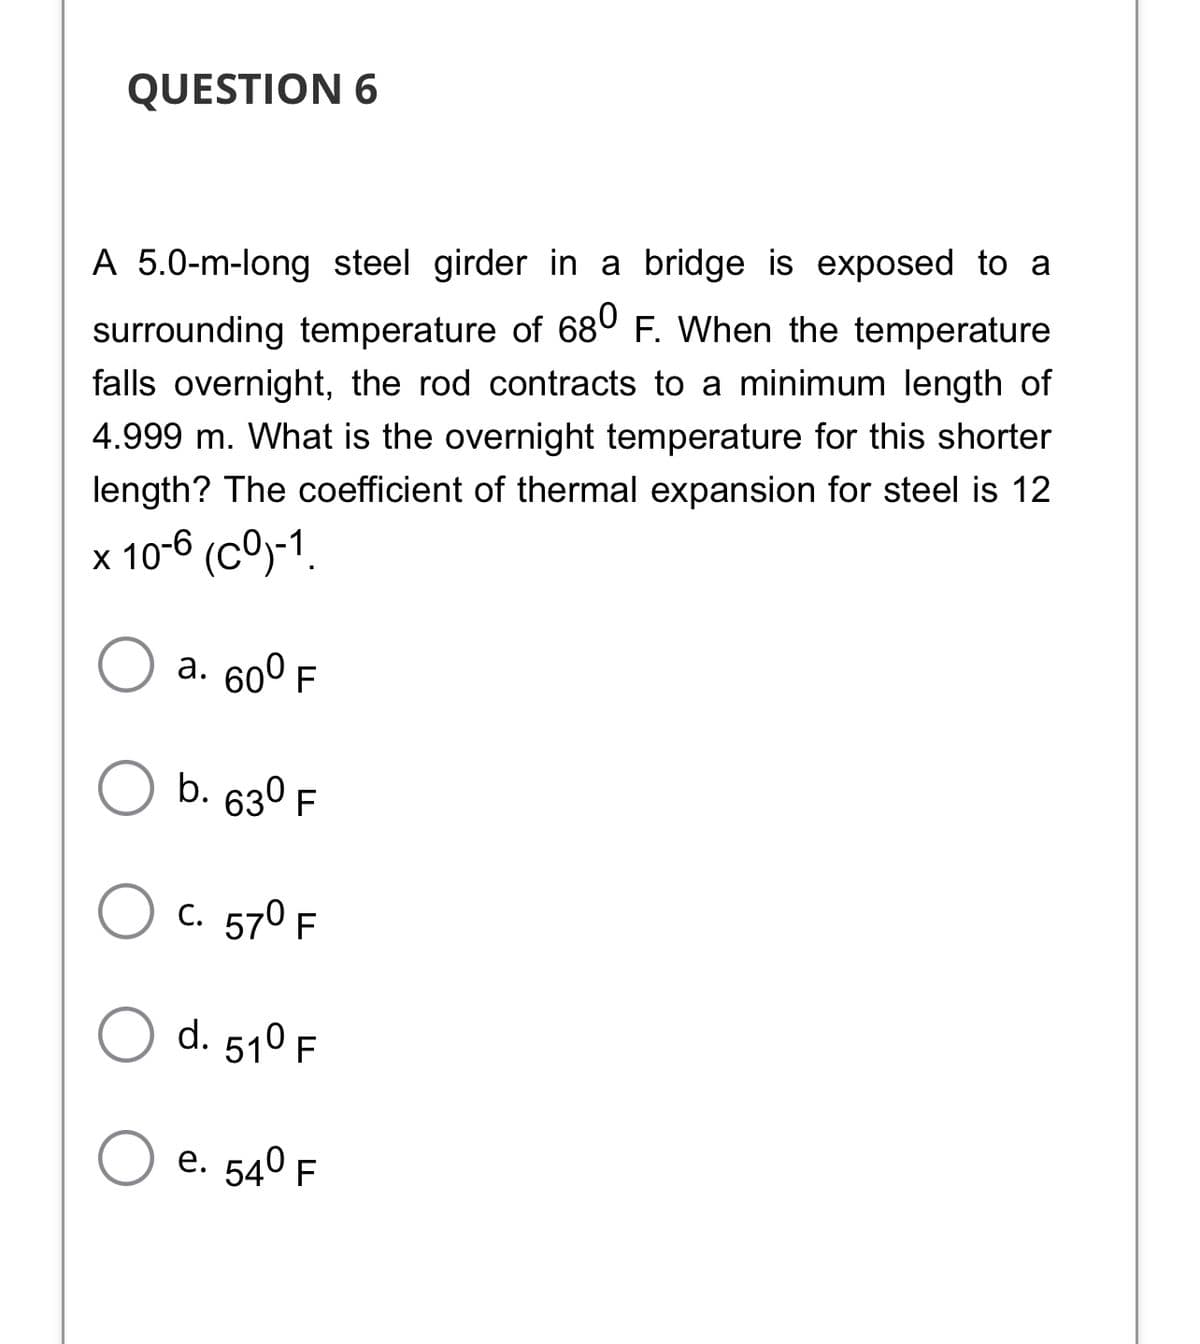 QUESTION 6
A 5.0-m-long steel girder in a bridge is exposed to a
surrounding temperature of 68° F. When the temperature
falls overnight, the rod contracts to a minimum length of
4.999 m. What is the overnight temperature for this shorter
length? The coefficient of thermal expansion for steel is 12
x 10-6 (cO)-1.
а. 600 F
b. 630 F
C. 570 F
d. 510 F
е. 540 F
